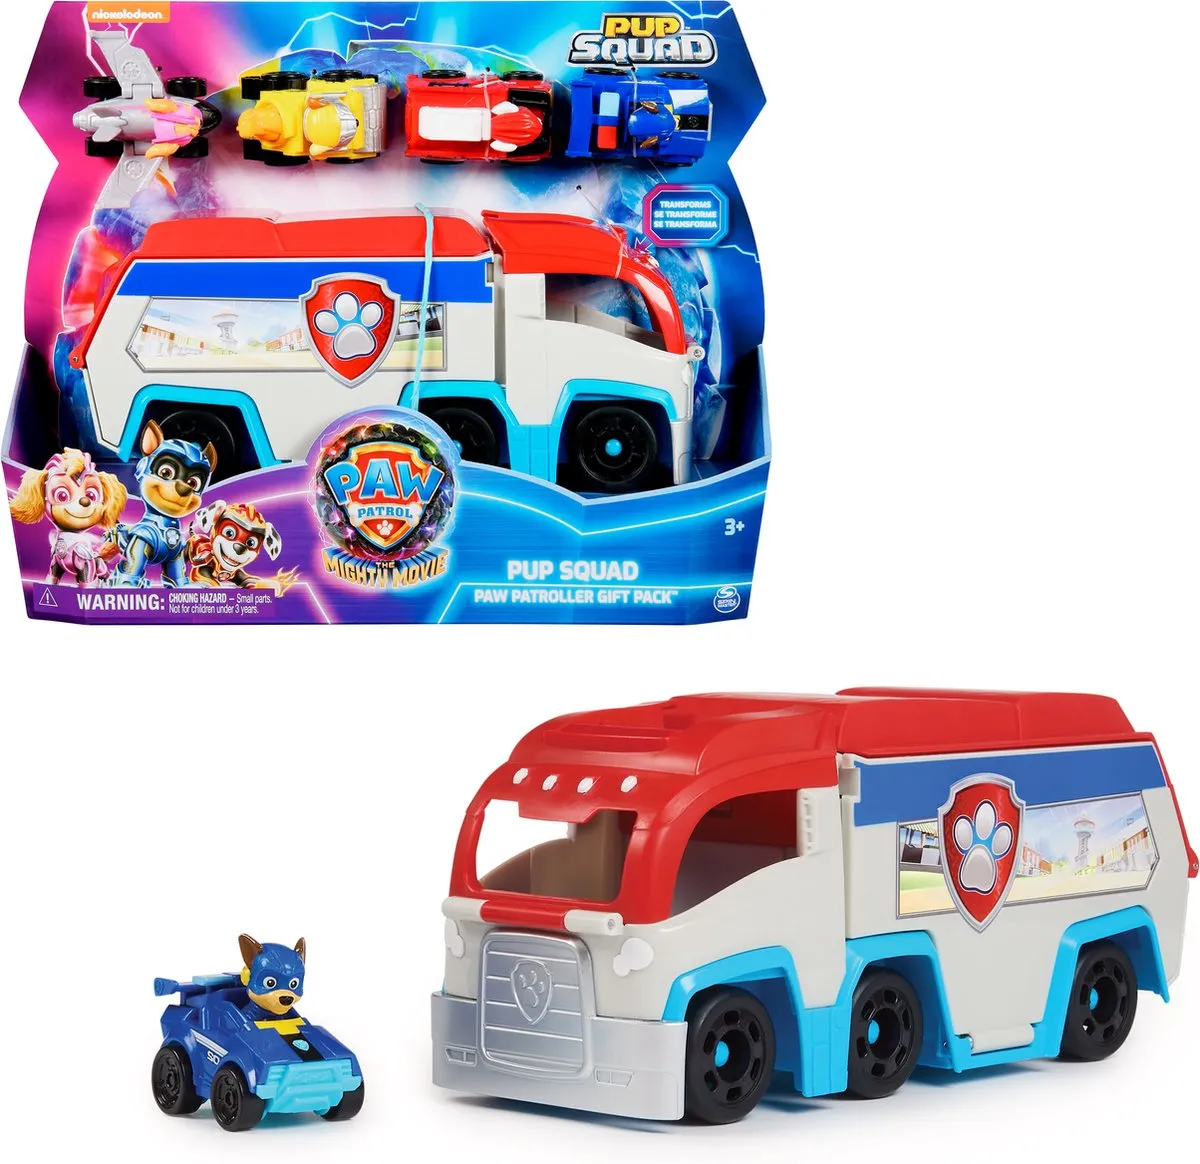 PAW Patrol The Mighty Movie - Pup Squad Patroller speelgoedtruck met Mighty Pups Chase Squad speelgoedauto speelgoed